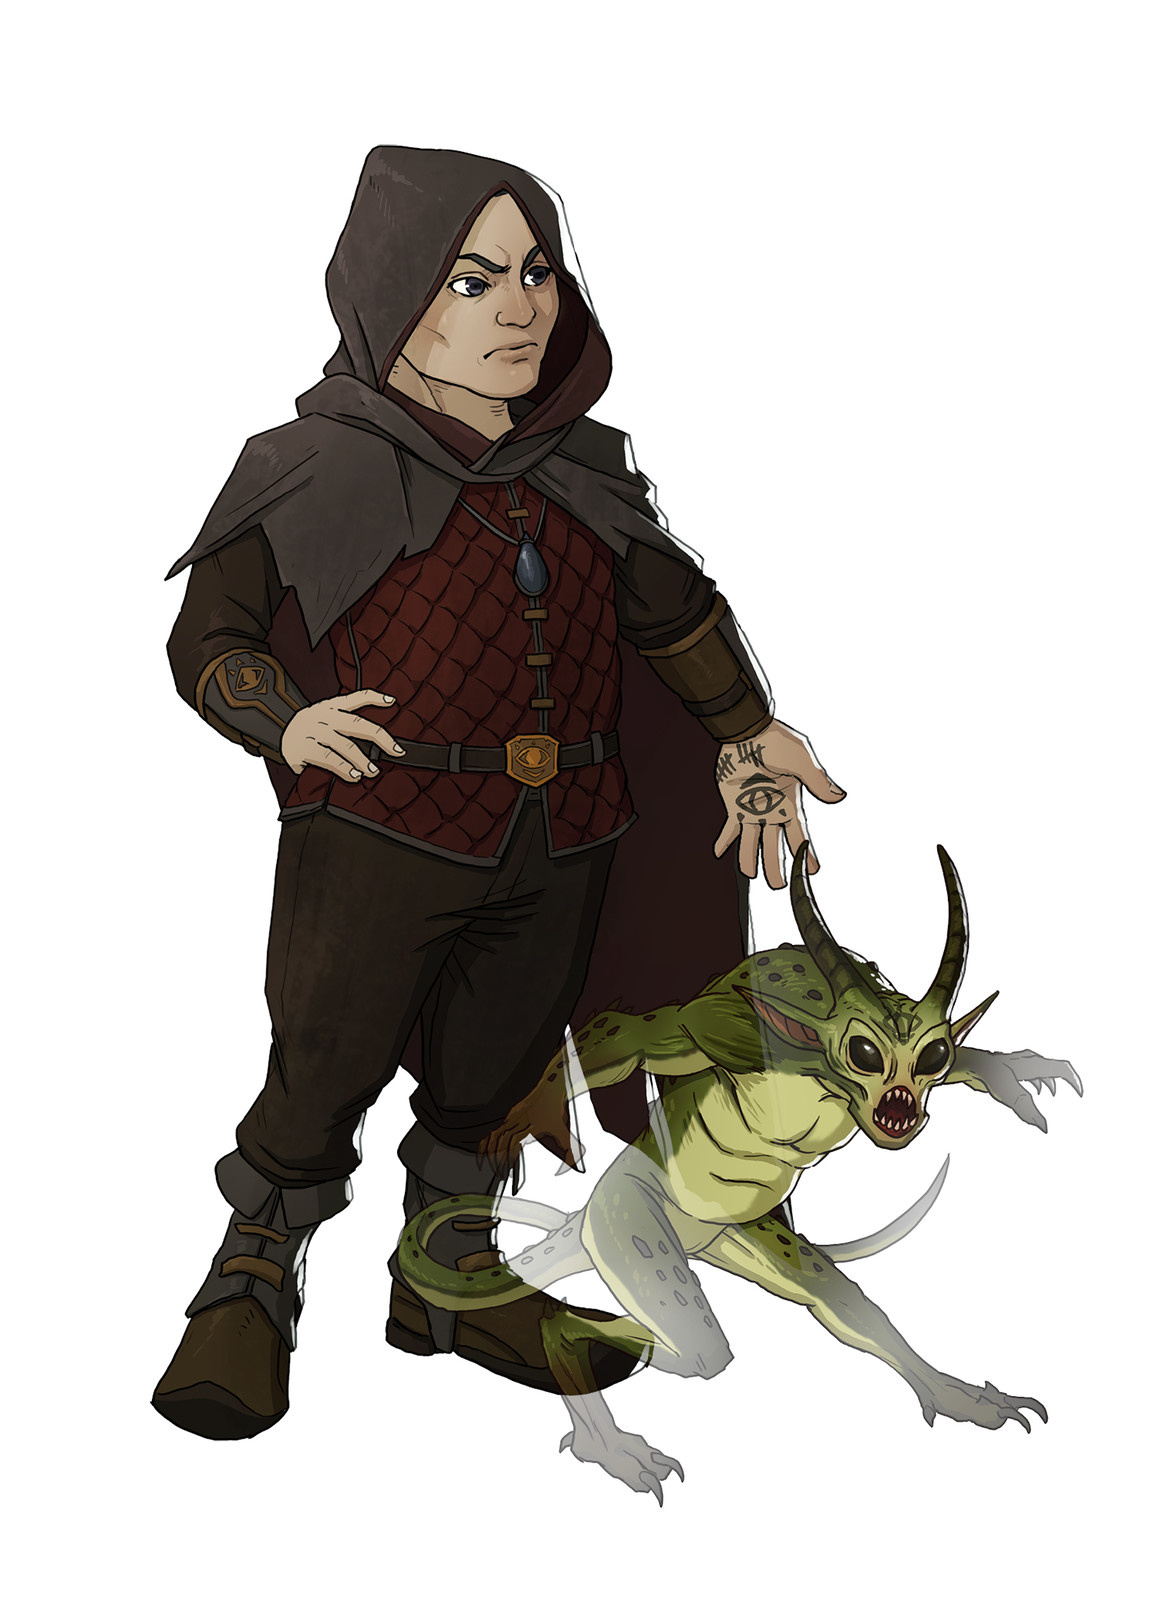 Abel, gnome warlock with his familiar, Dobby